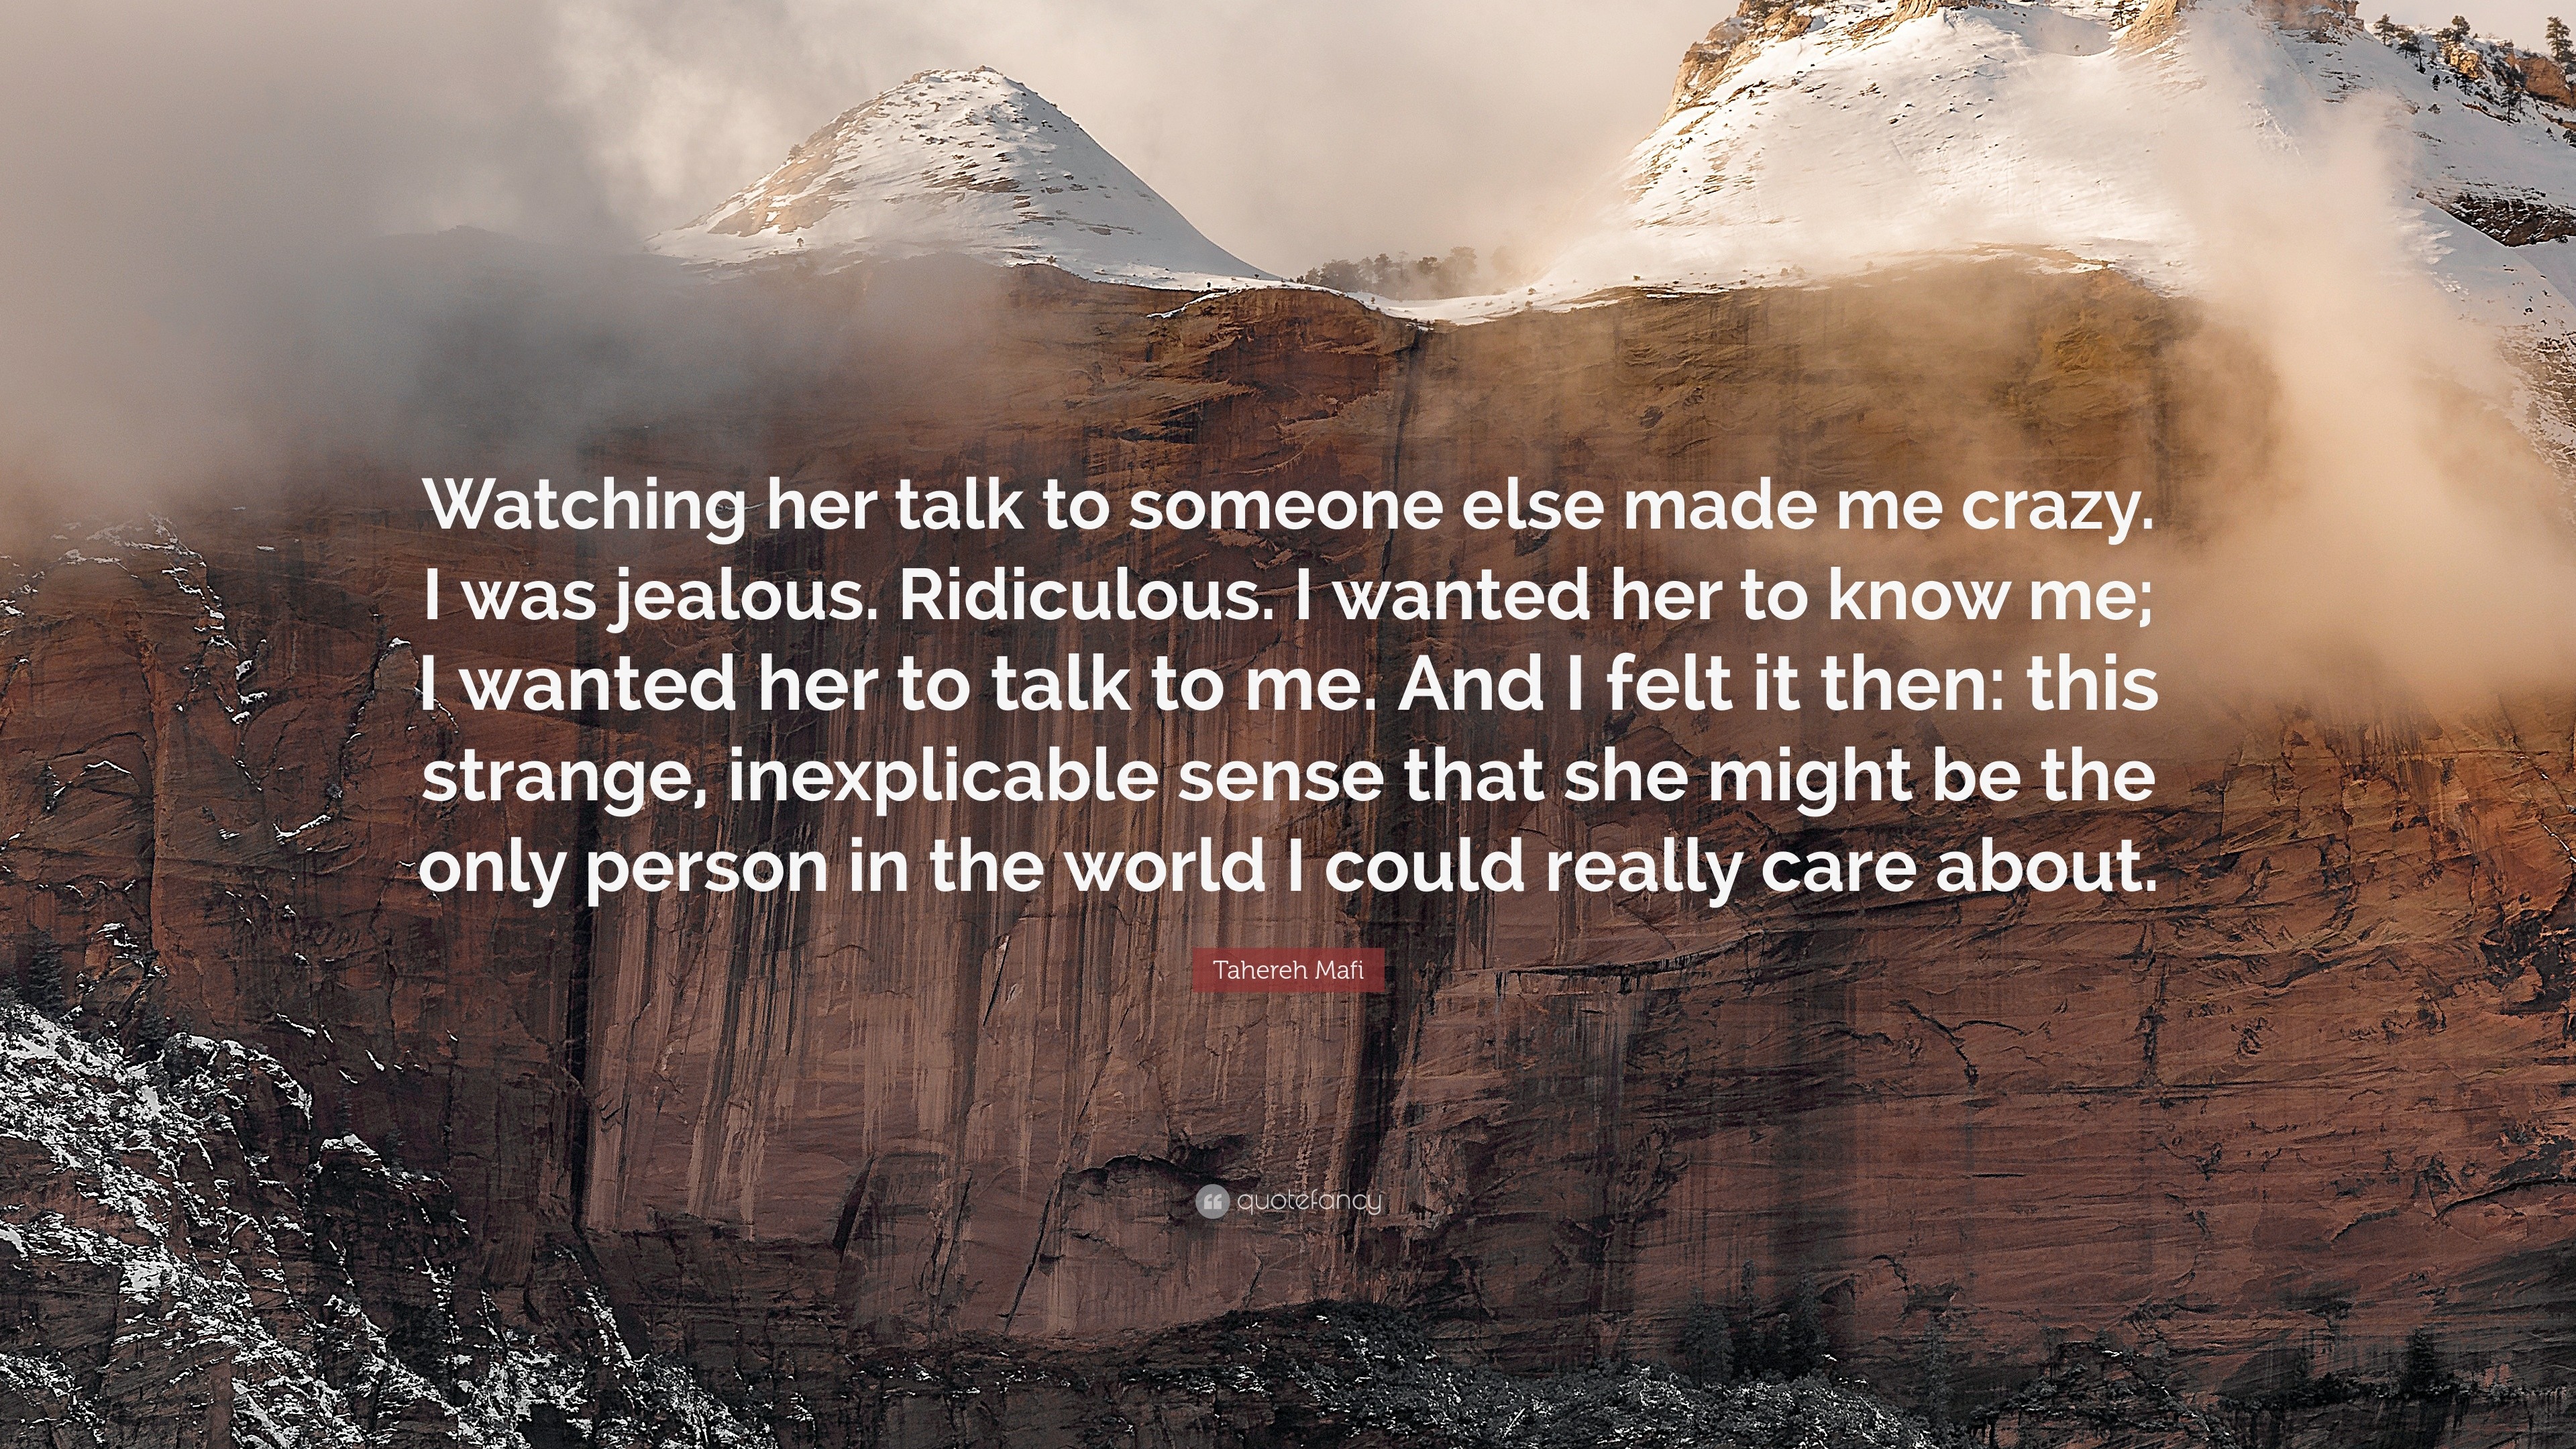 Tahereh Mafi Quote “Watching her talk to someone else made me crazy I